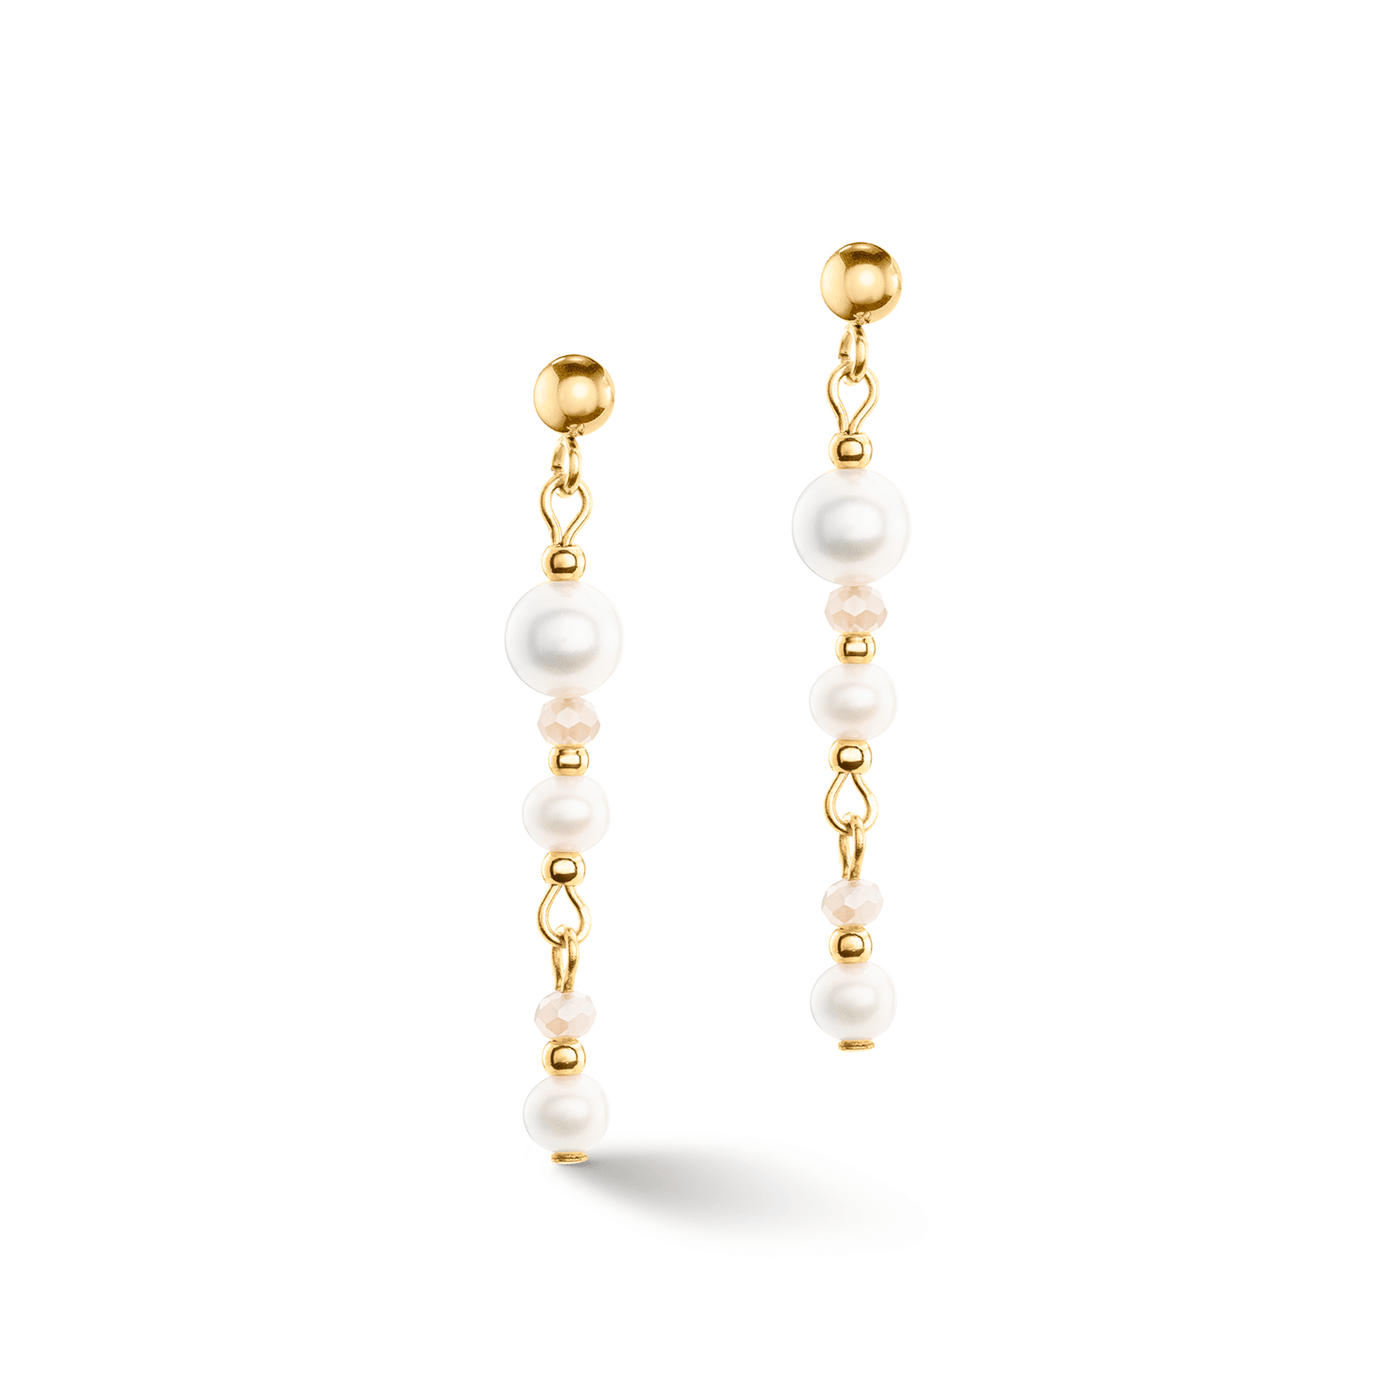 Coeur De Lion Gold and Pearl Drops Earrings - Rococo Jewellery